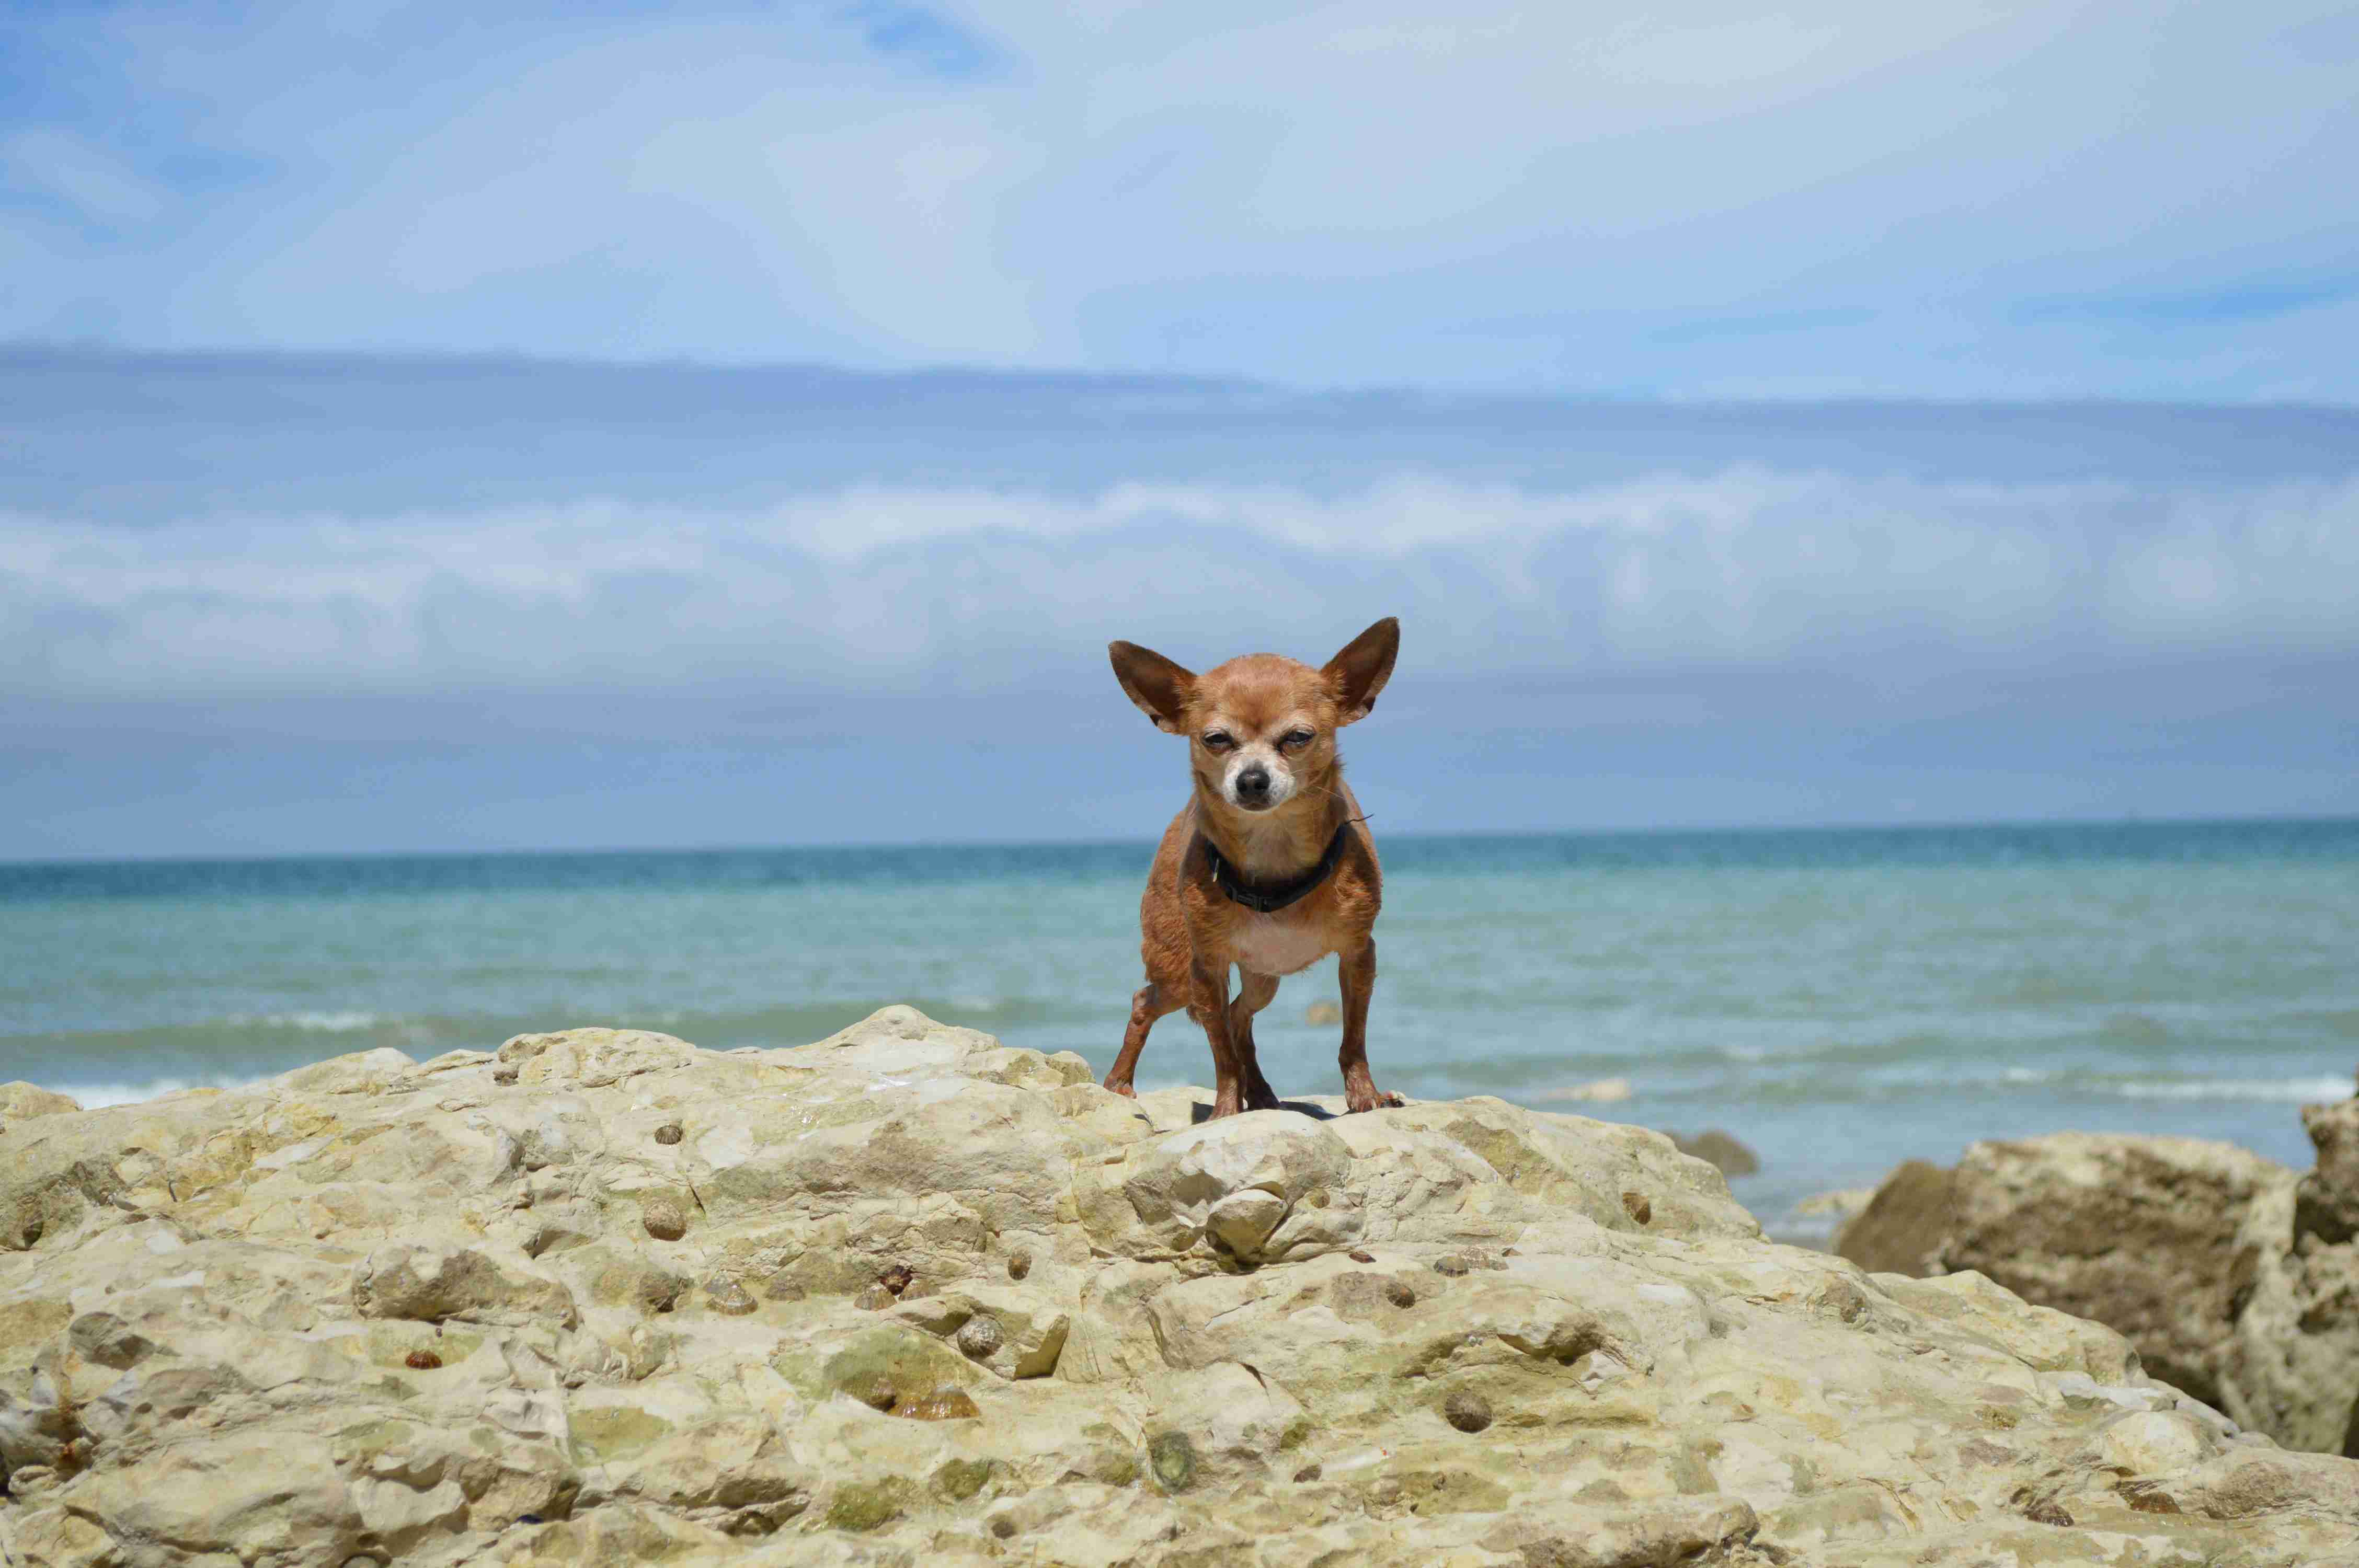 Can a Chihuahua's anger issues be influenced by their overall health and well-being?